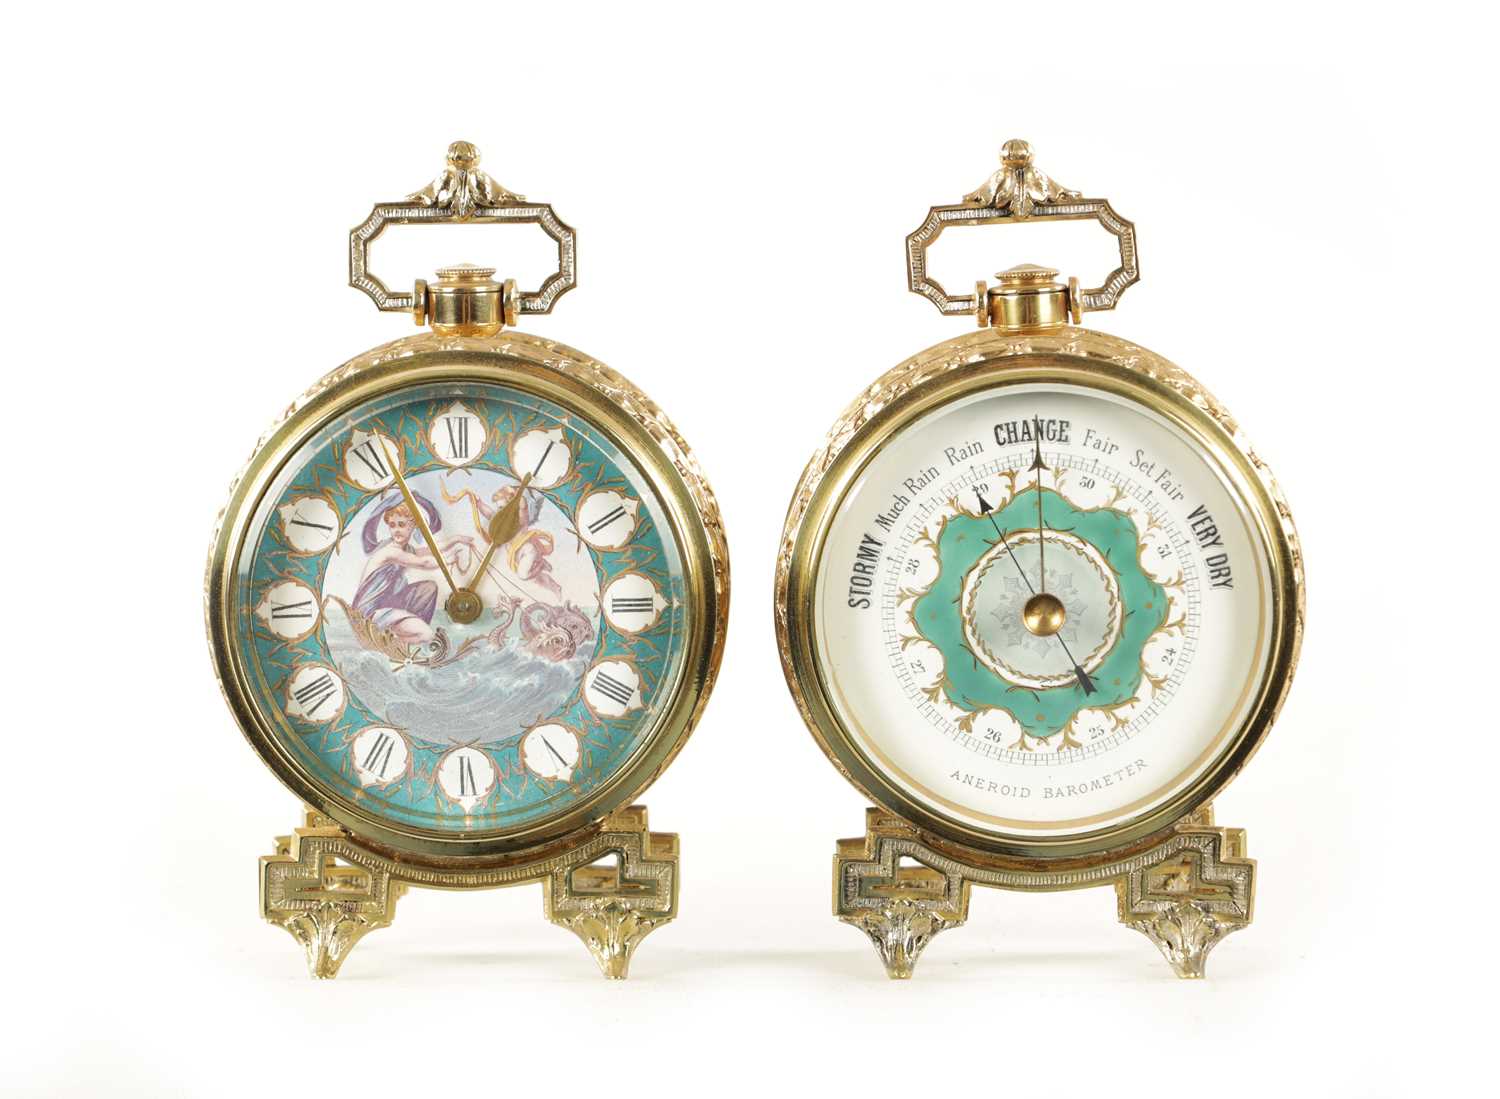 A LATE 19TH CENTURY DESK CLOCK AND BAROMETER SET